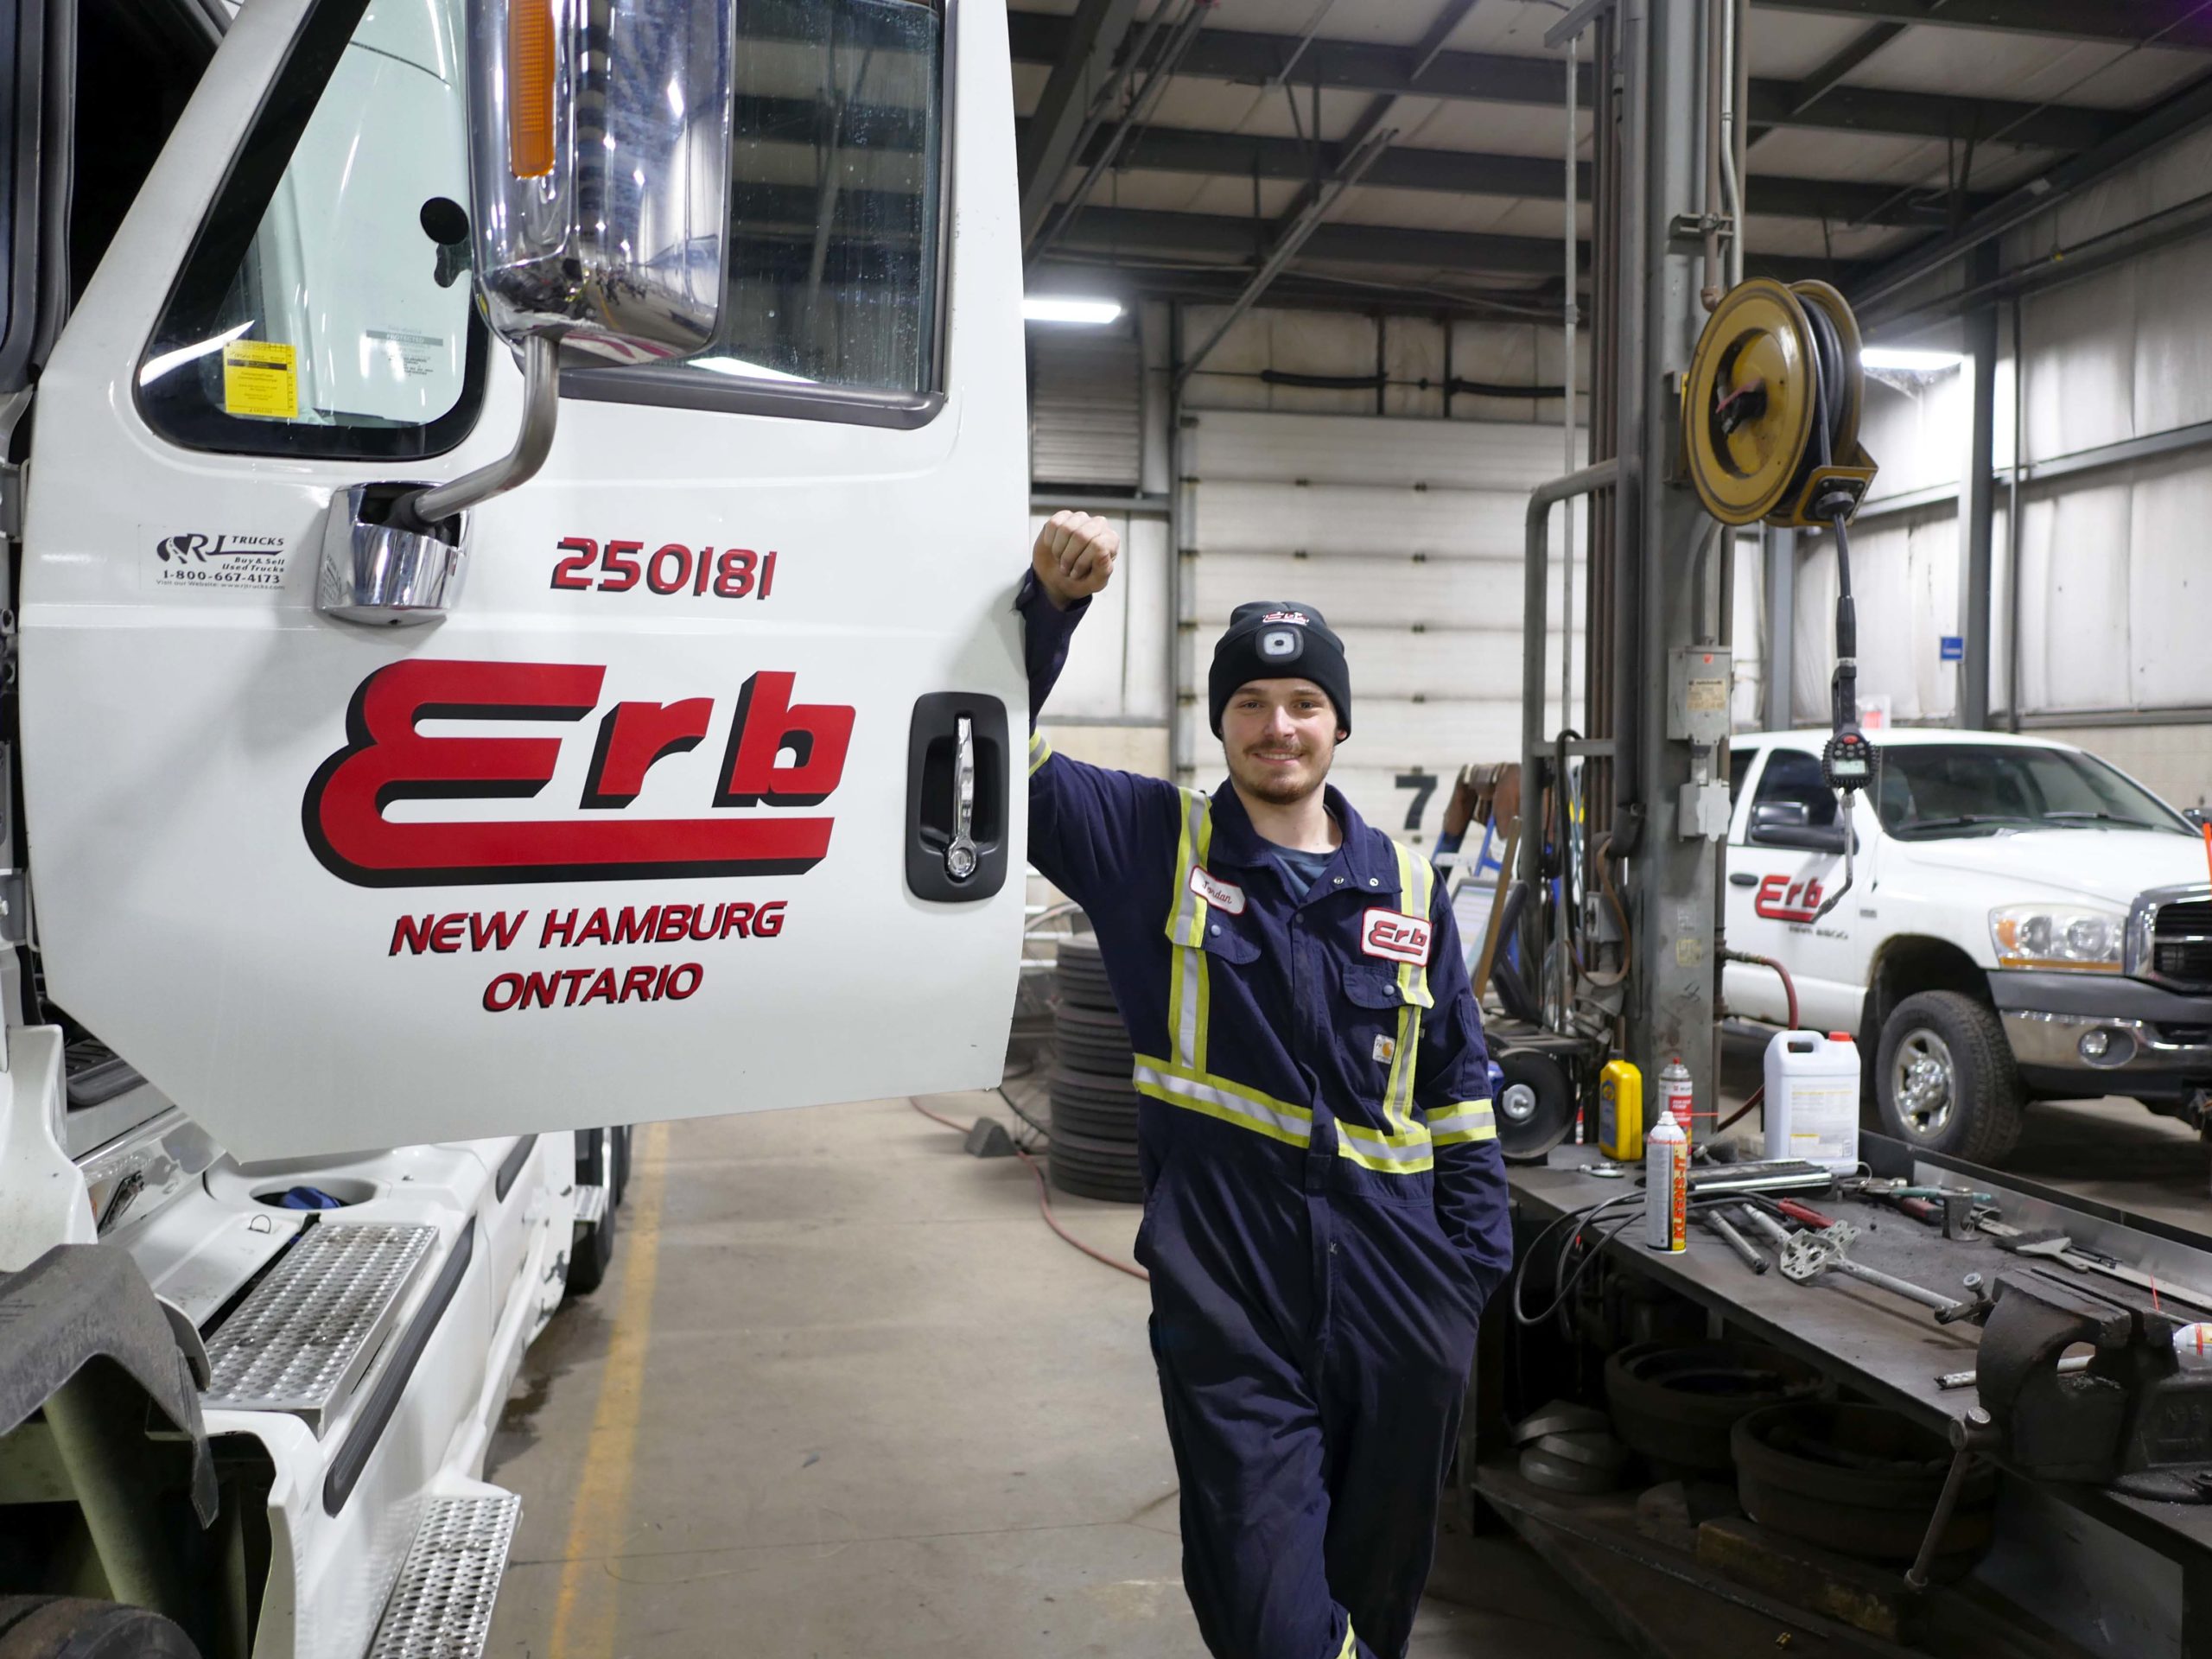 Day in the life of a 310T Truck Technician Apprentice